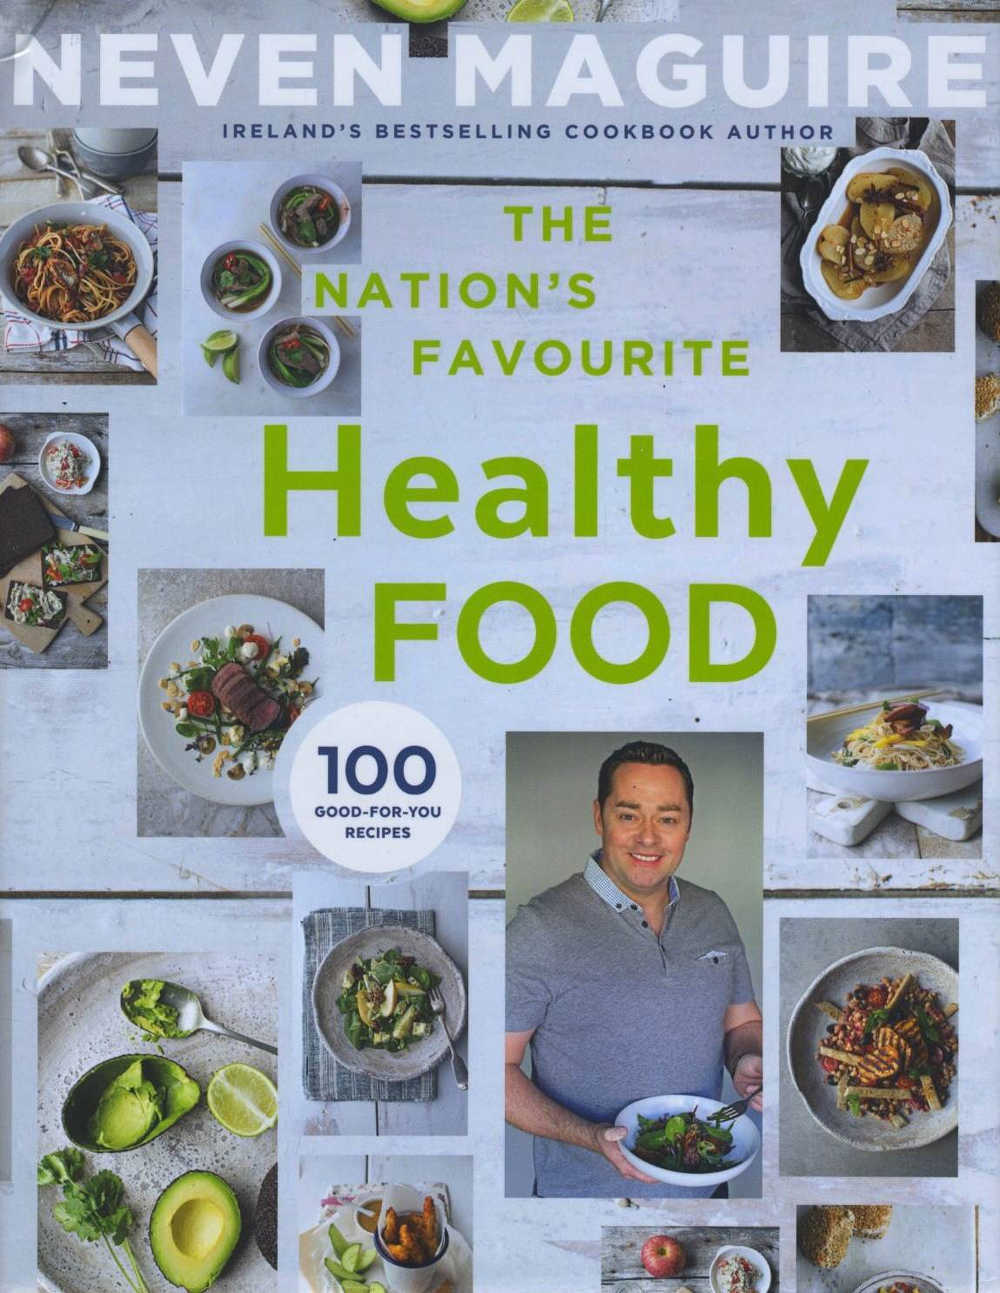 Neven Maguire The Nation’s Favourite Healthy Food (Gill & Macmillan hardback, €22.99).